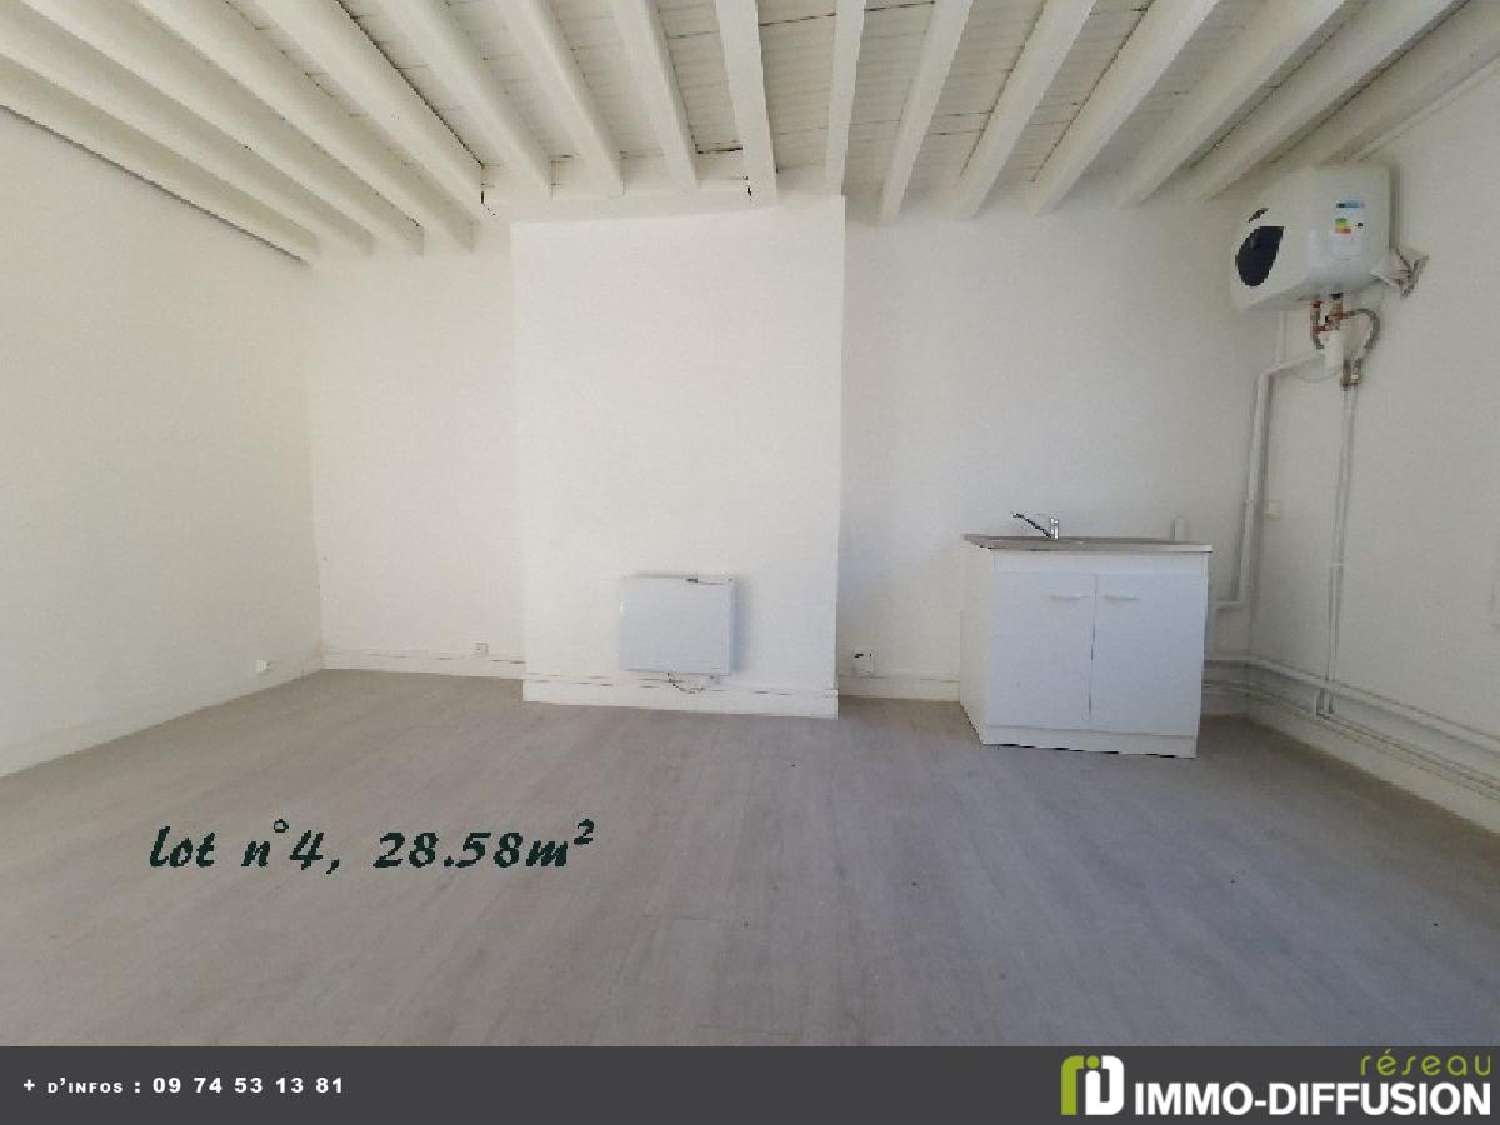  for sale apartment Montataire Oise 4